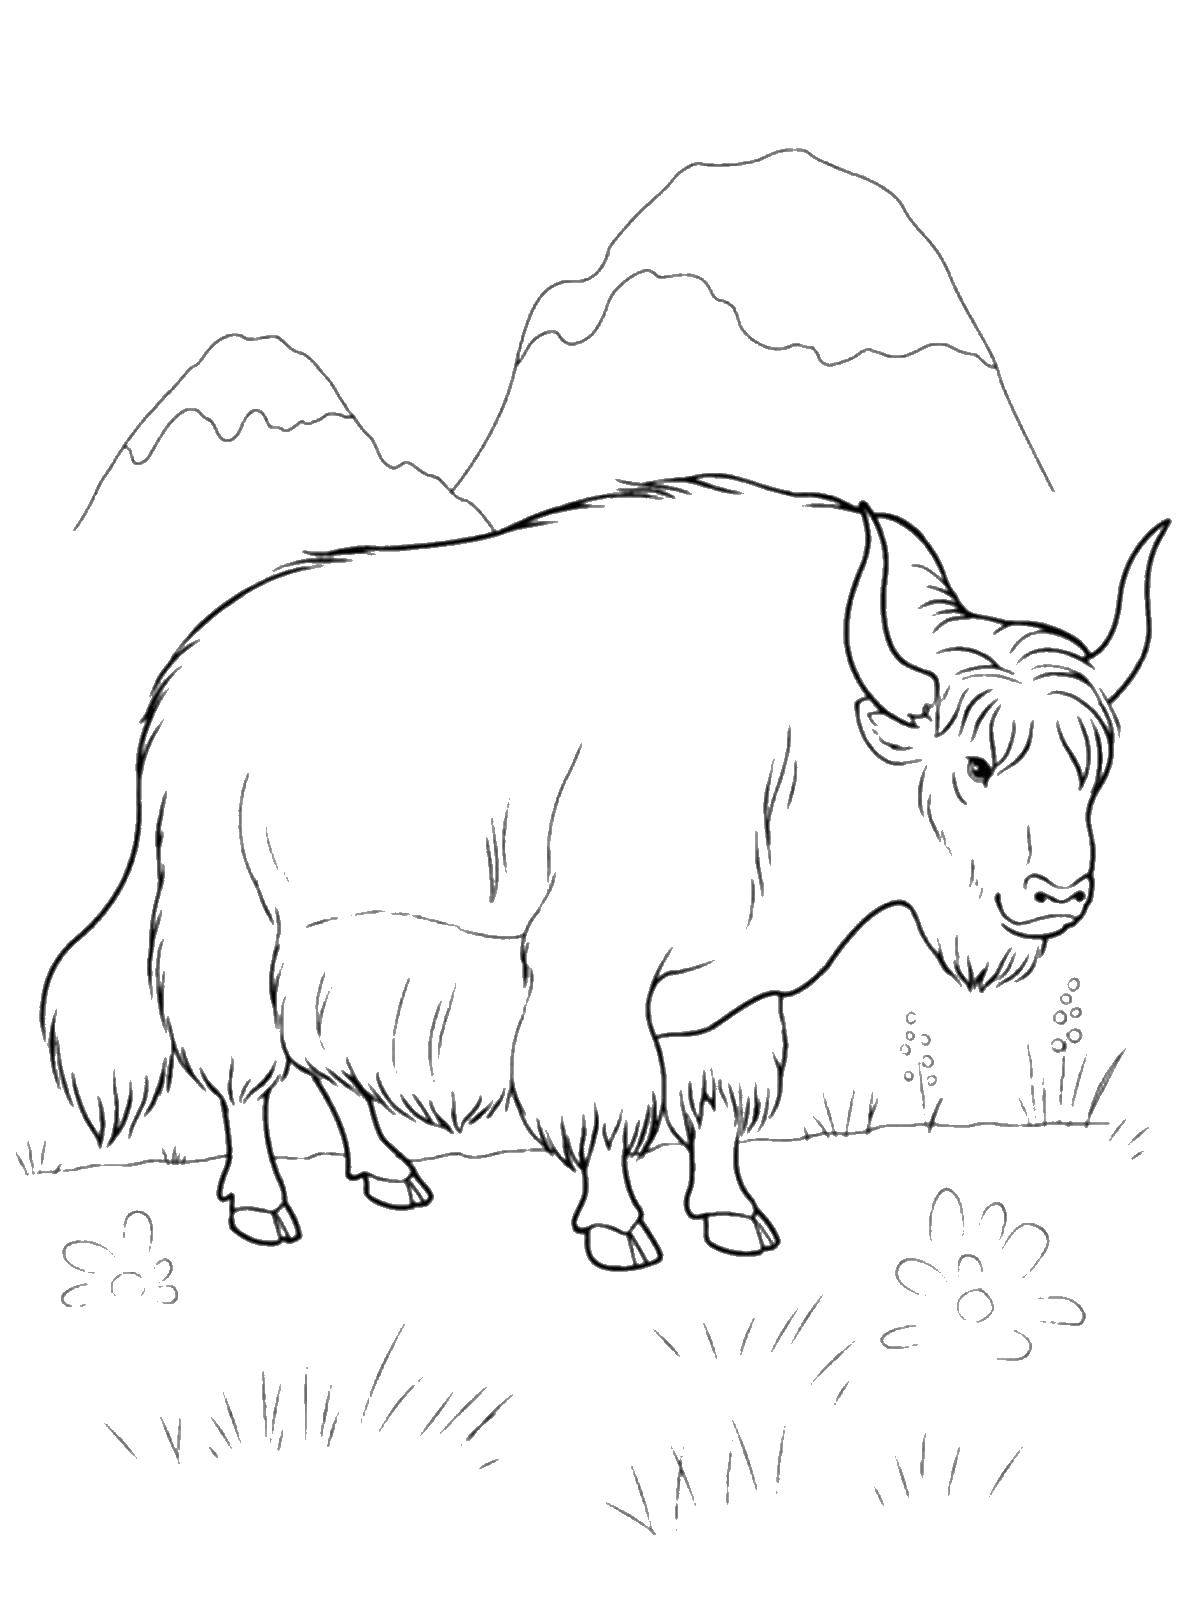 Coloring Yak. Category wild animals. Tags:  Yak.